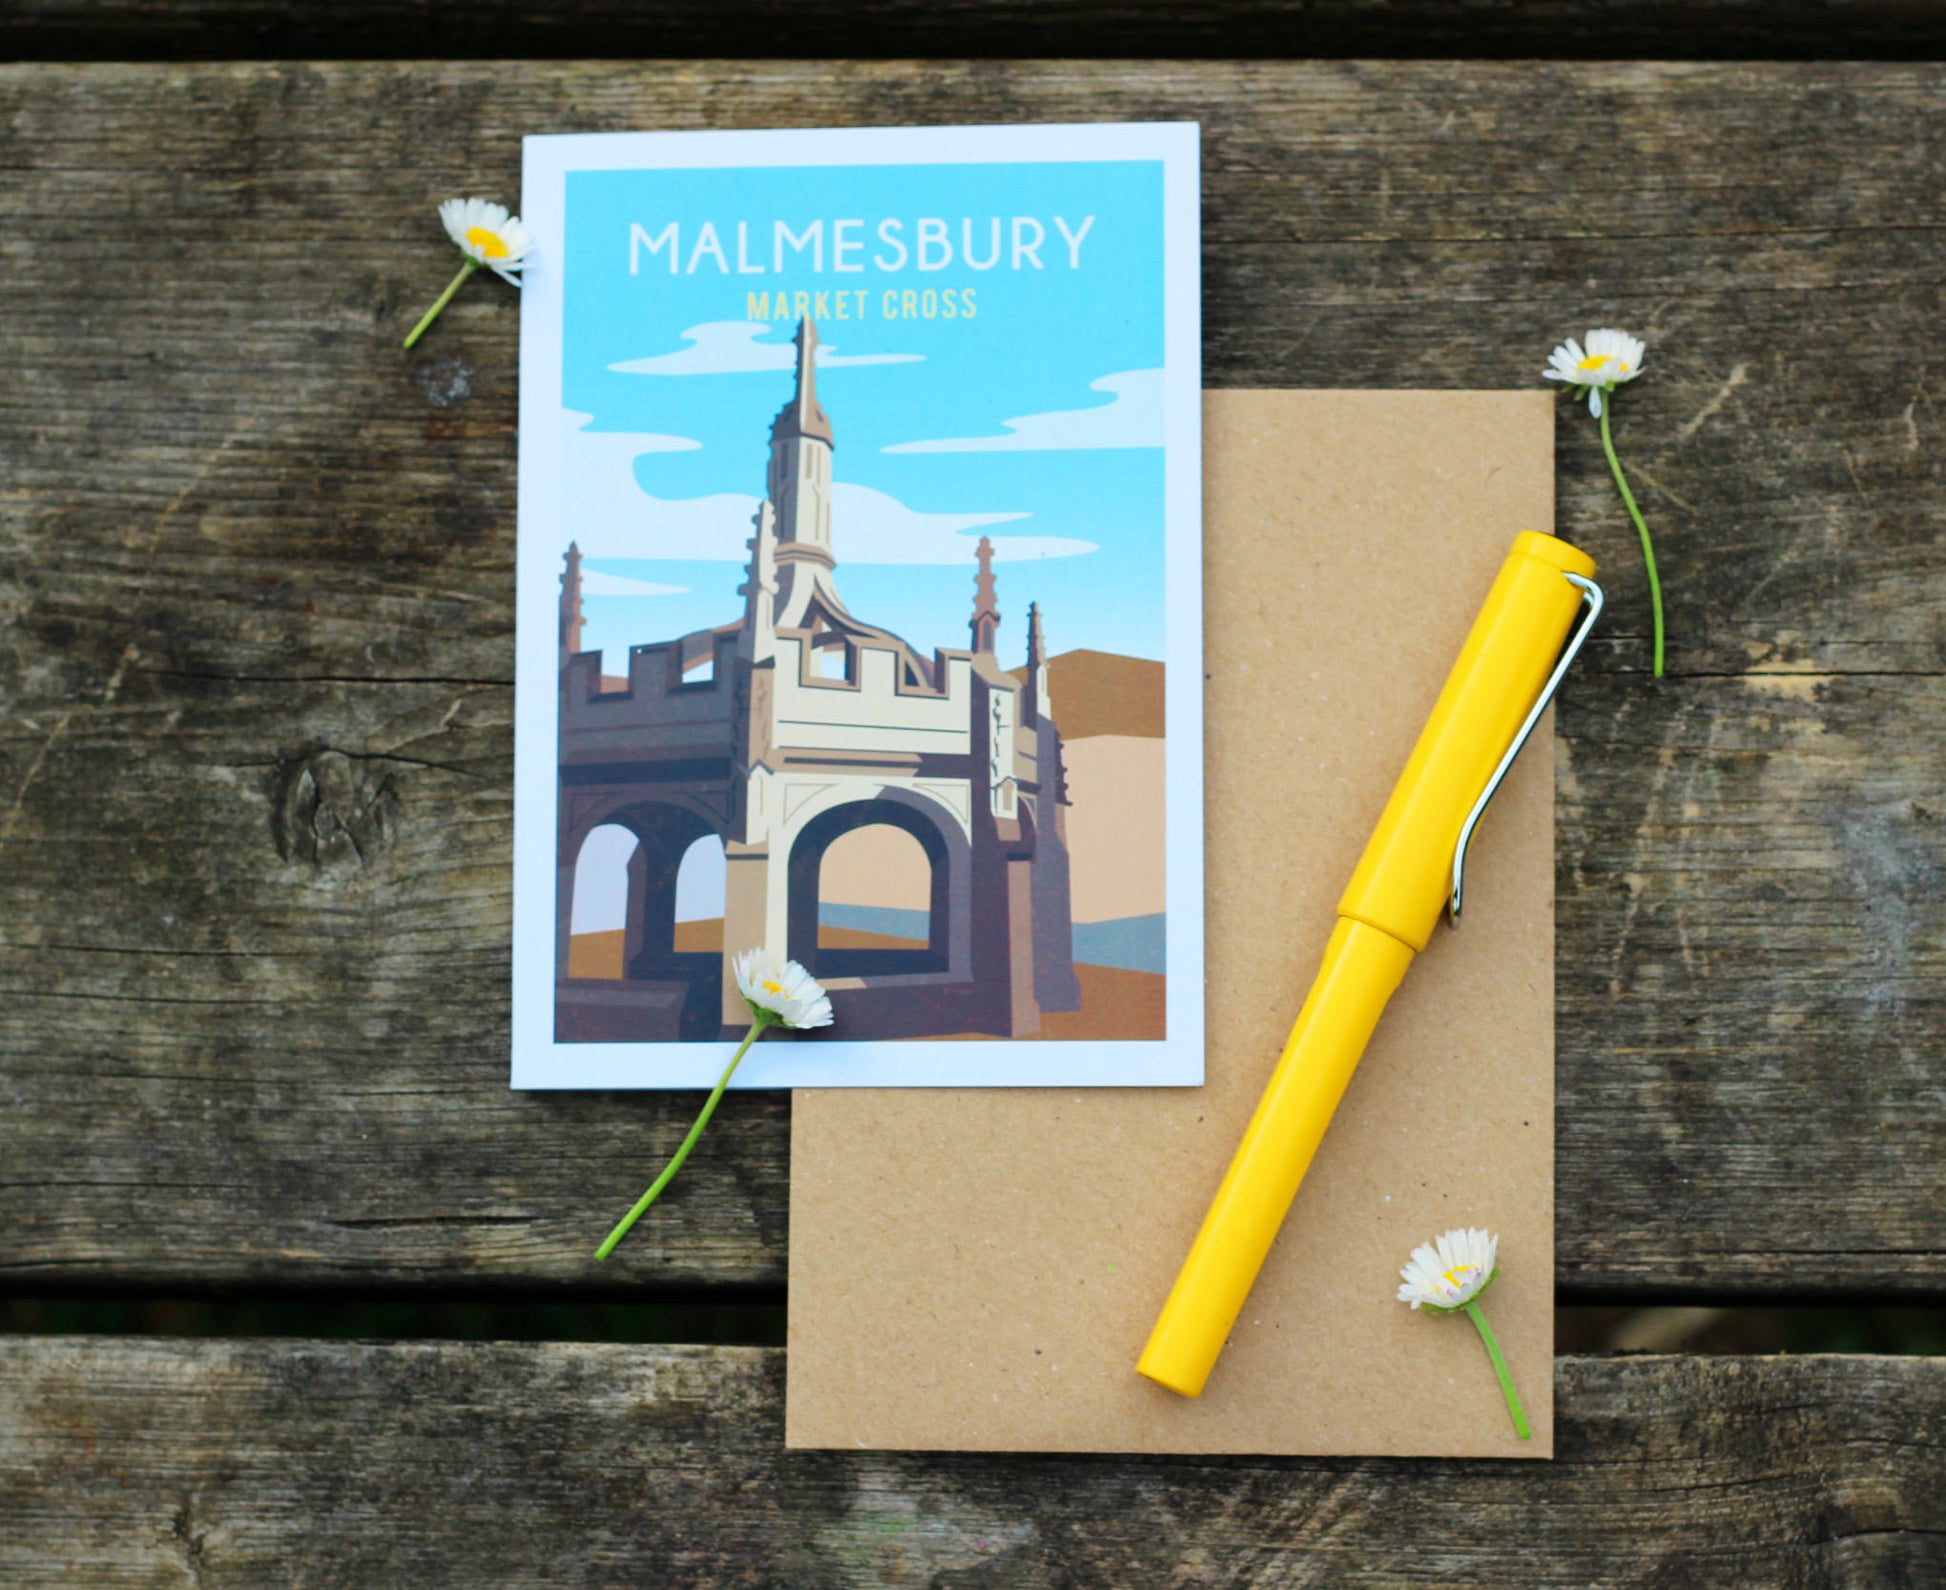 Malmesbury Market Cross Greeting Card on table with pen